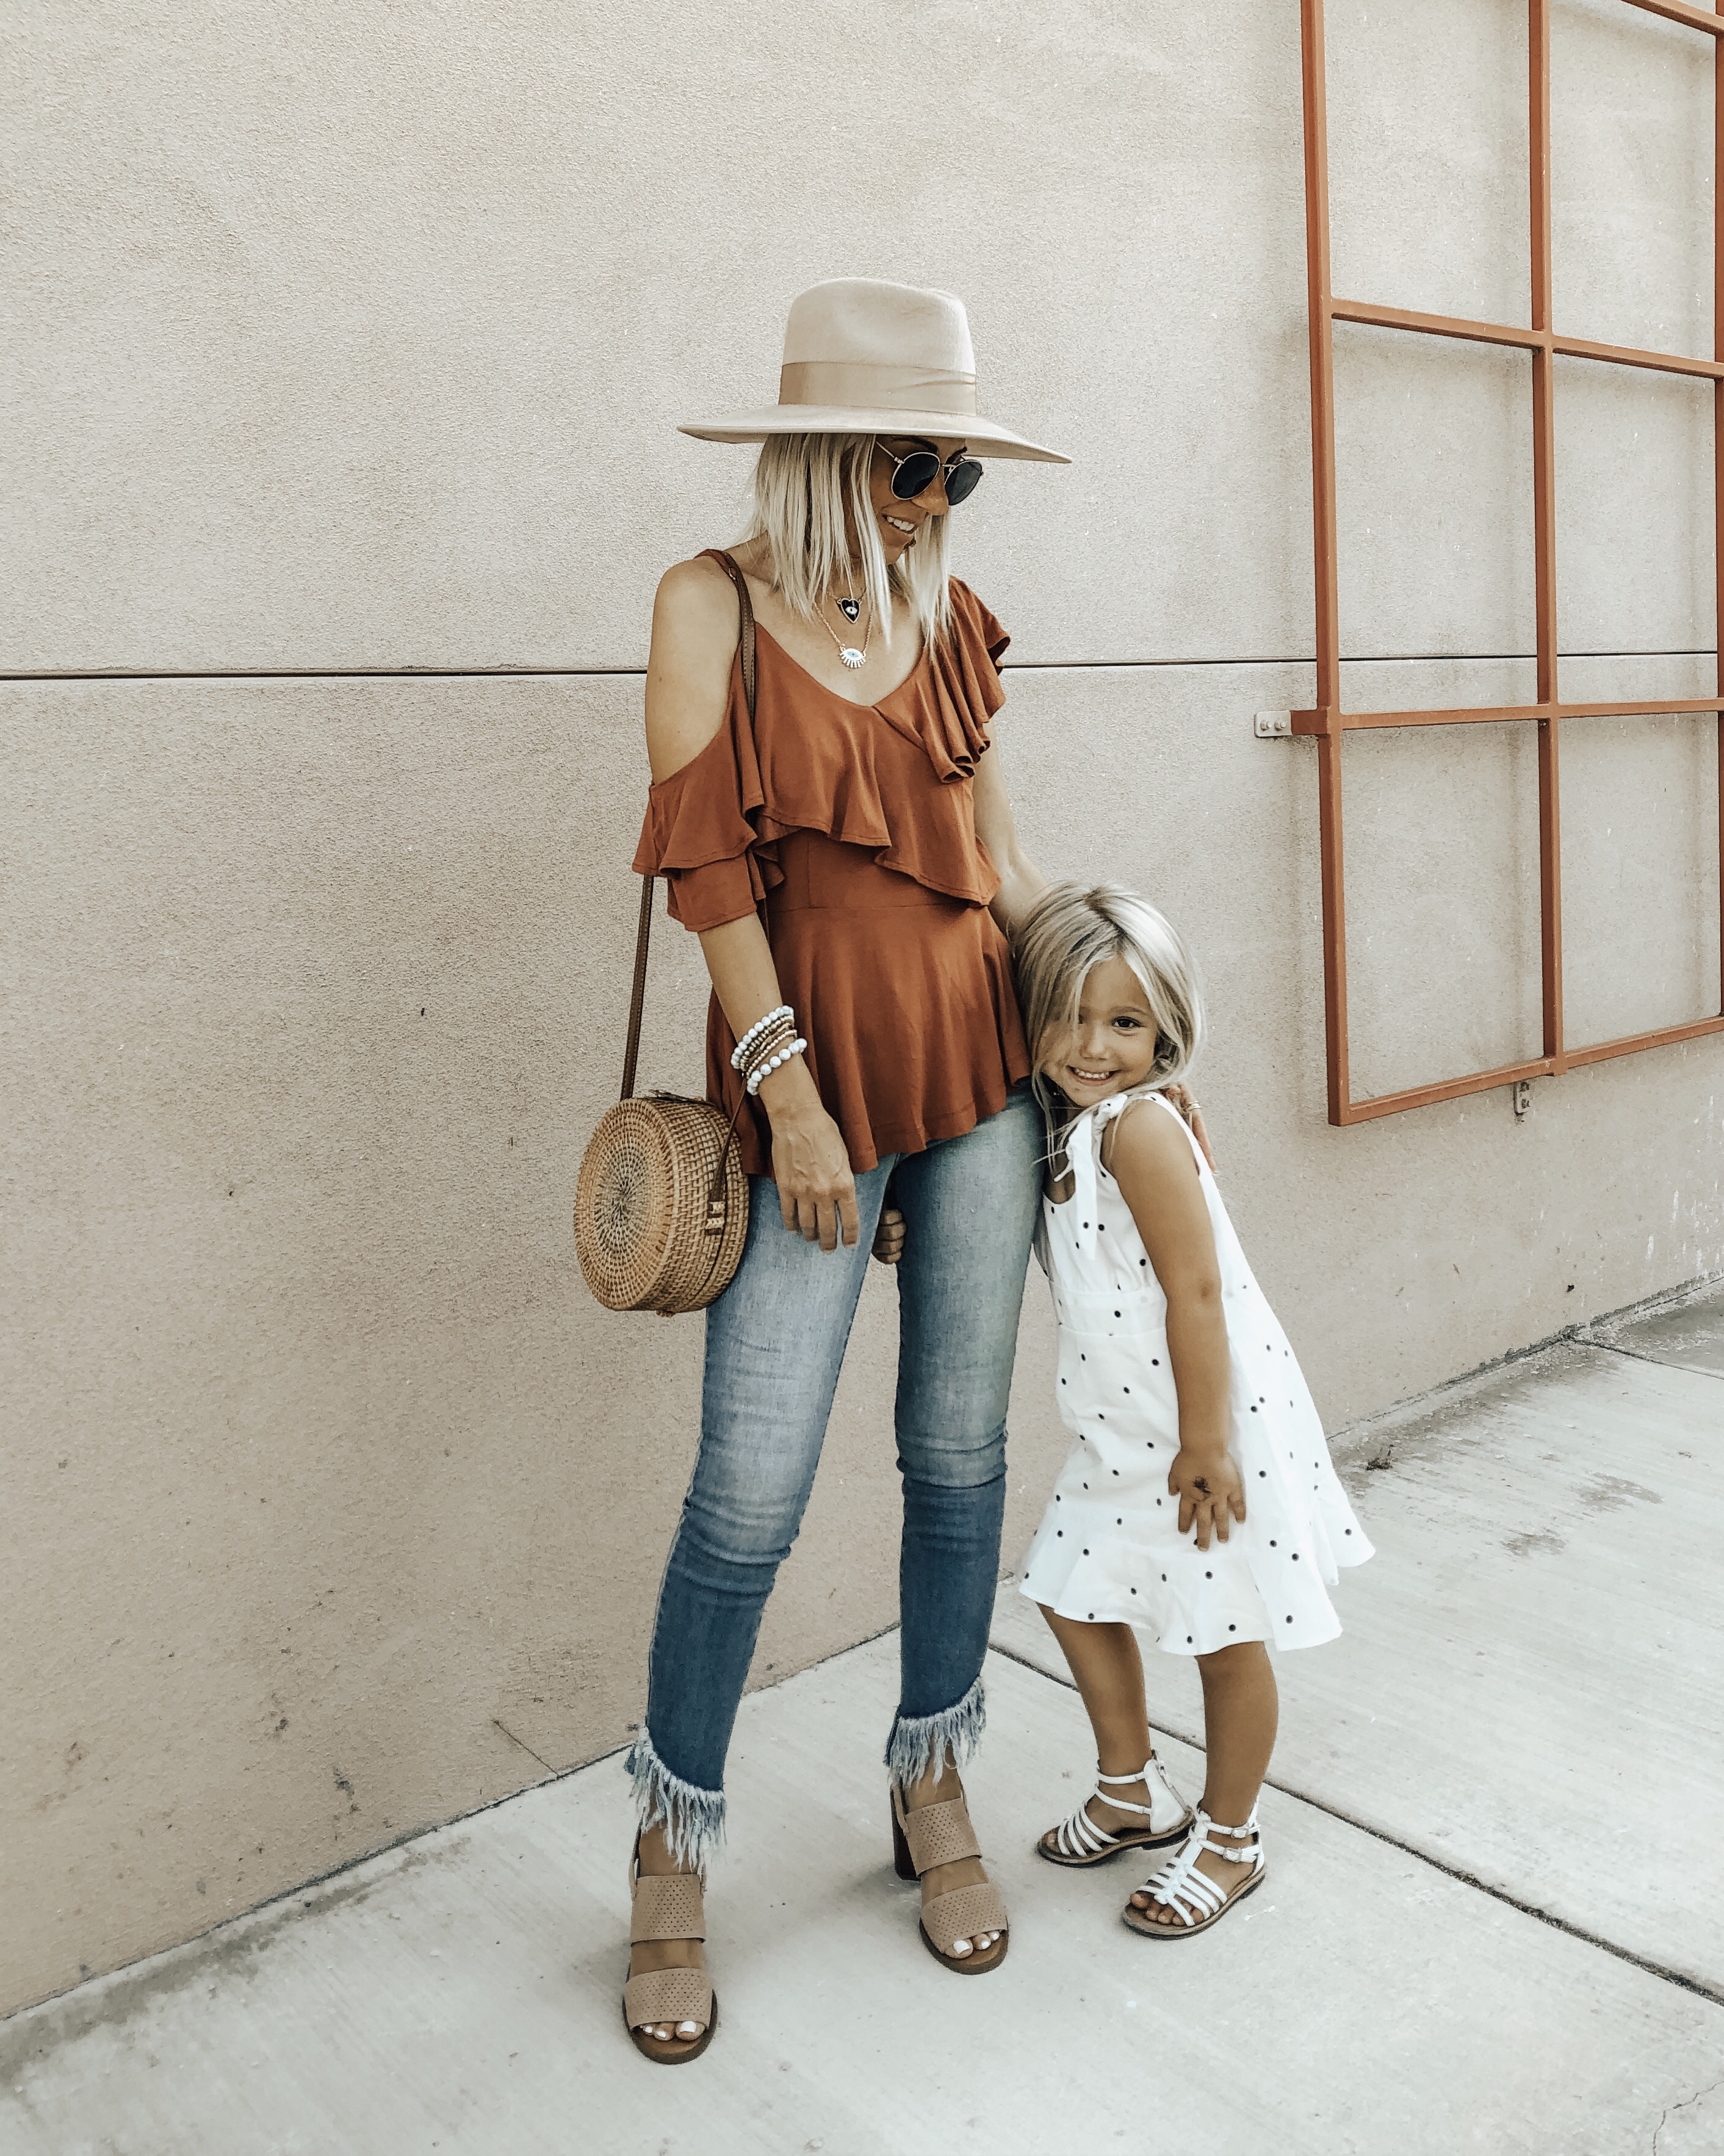 THE BEST DENIM FOR FALL FROM WALMART- Jaclyn De Leon Style + Are you shopping for new denim for back to school. I've rounded up my favorite + most affordable denim from Walmart.